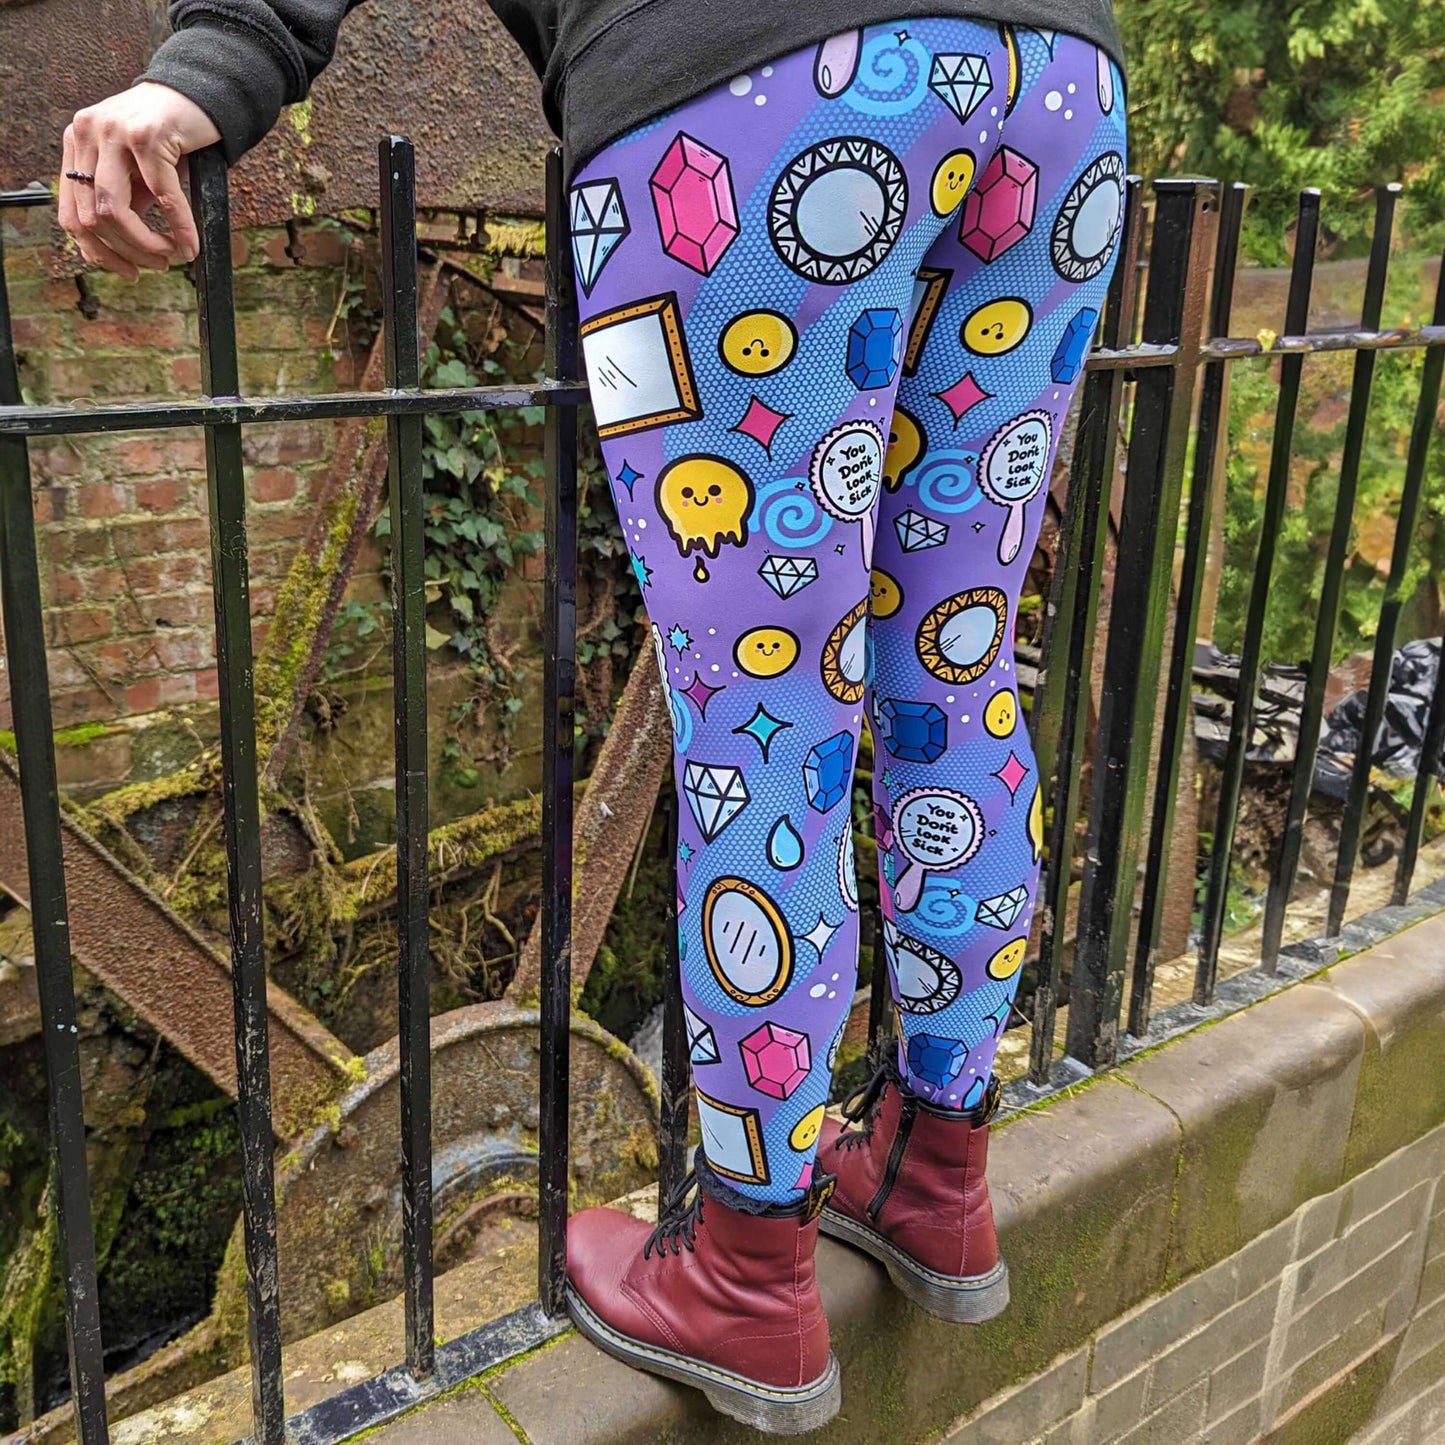 The You Don't Look Sick Leggings modelled by the owner of Innabox Nikky with red boots and the innabox invisible illness club sweater. She is stood leaning forward on a metal railing to highlight the leggings. The purple base leggings features melting yellow smiley faces, mirrors, gemstones, teardrops, sparkles, swirls and dots with a centre hand held mirror reading 'you don't look sick'. The hand drawn design is raising awareness for invisible illnesses.